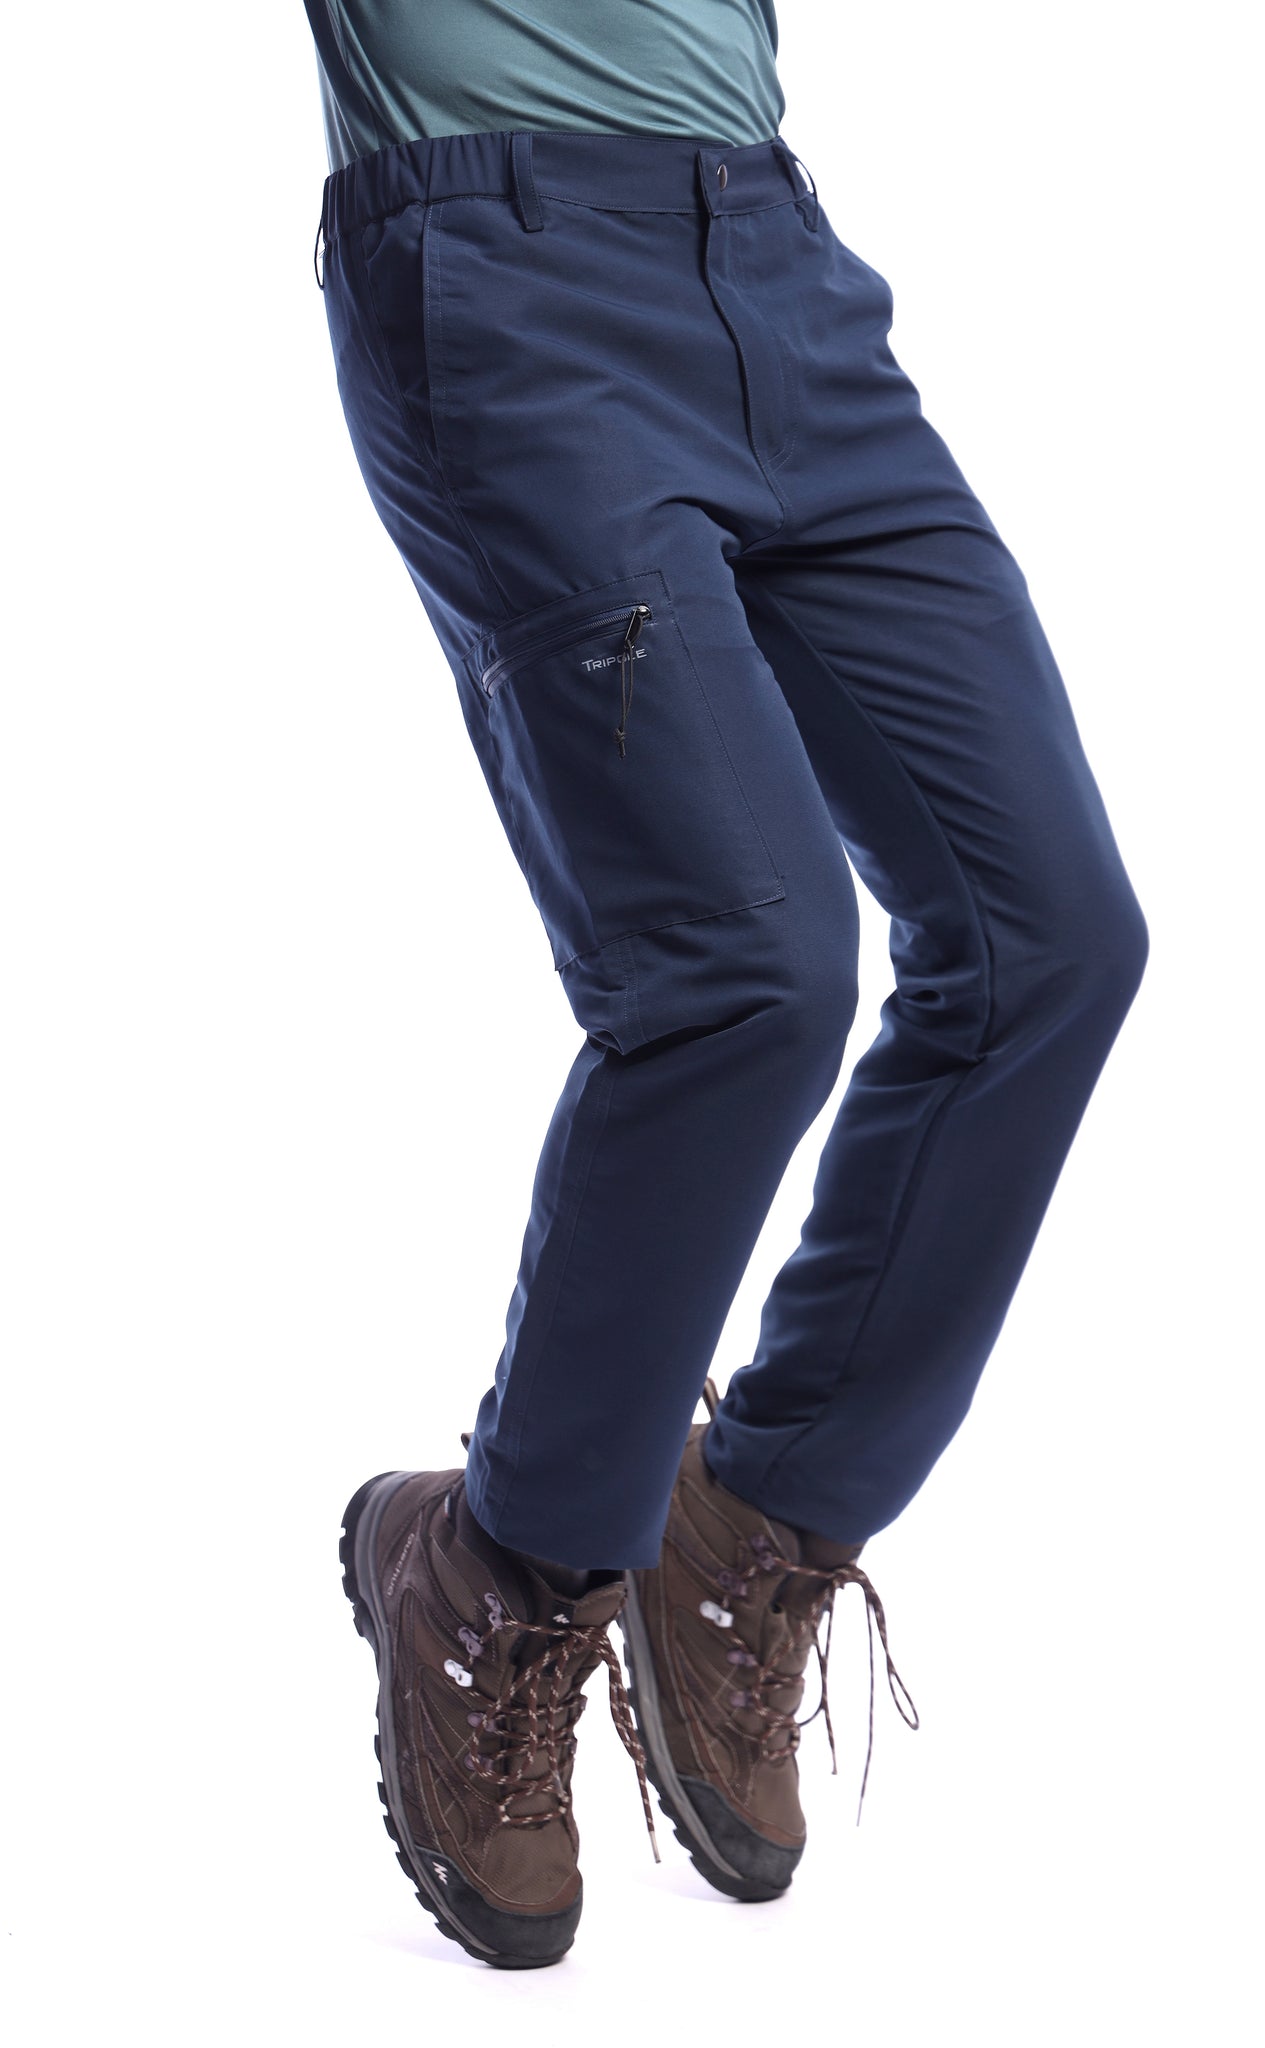 Men's Trekking and Hiking Pants and Trousers – Tripole Gears